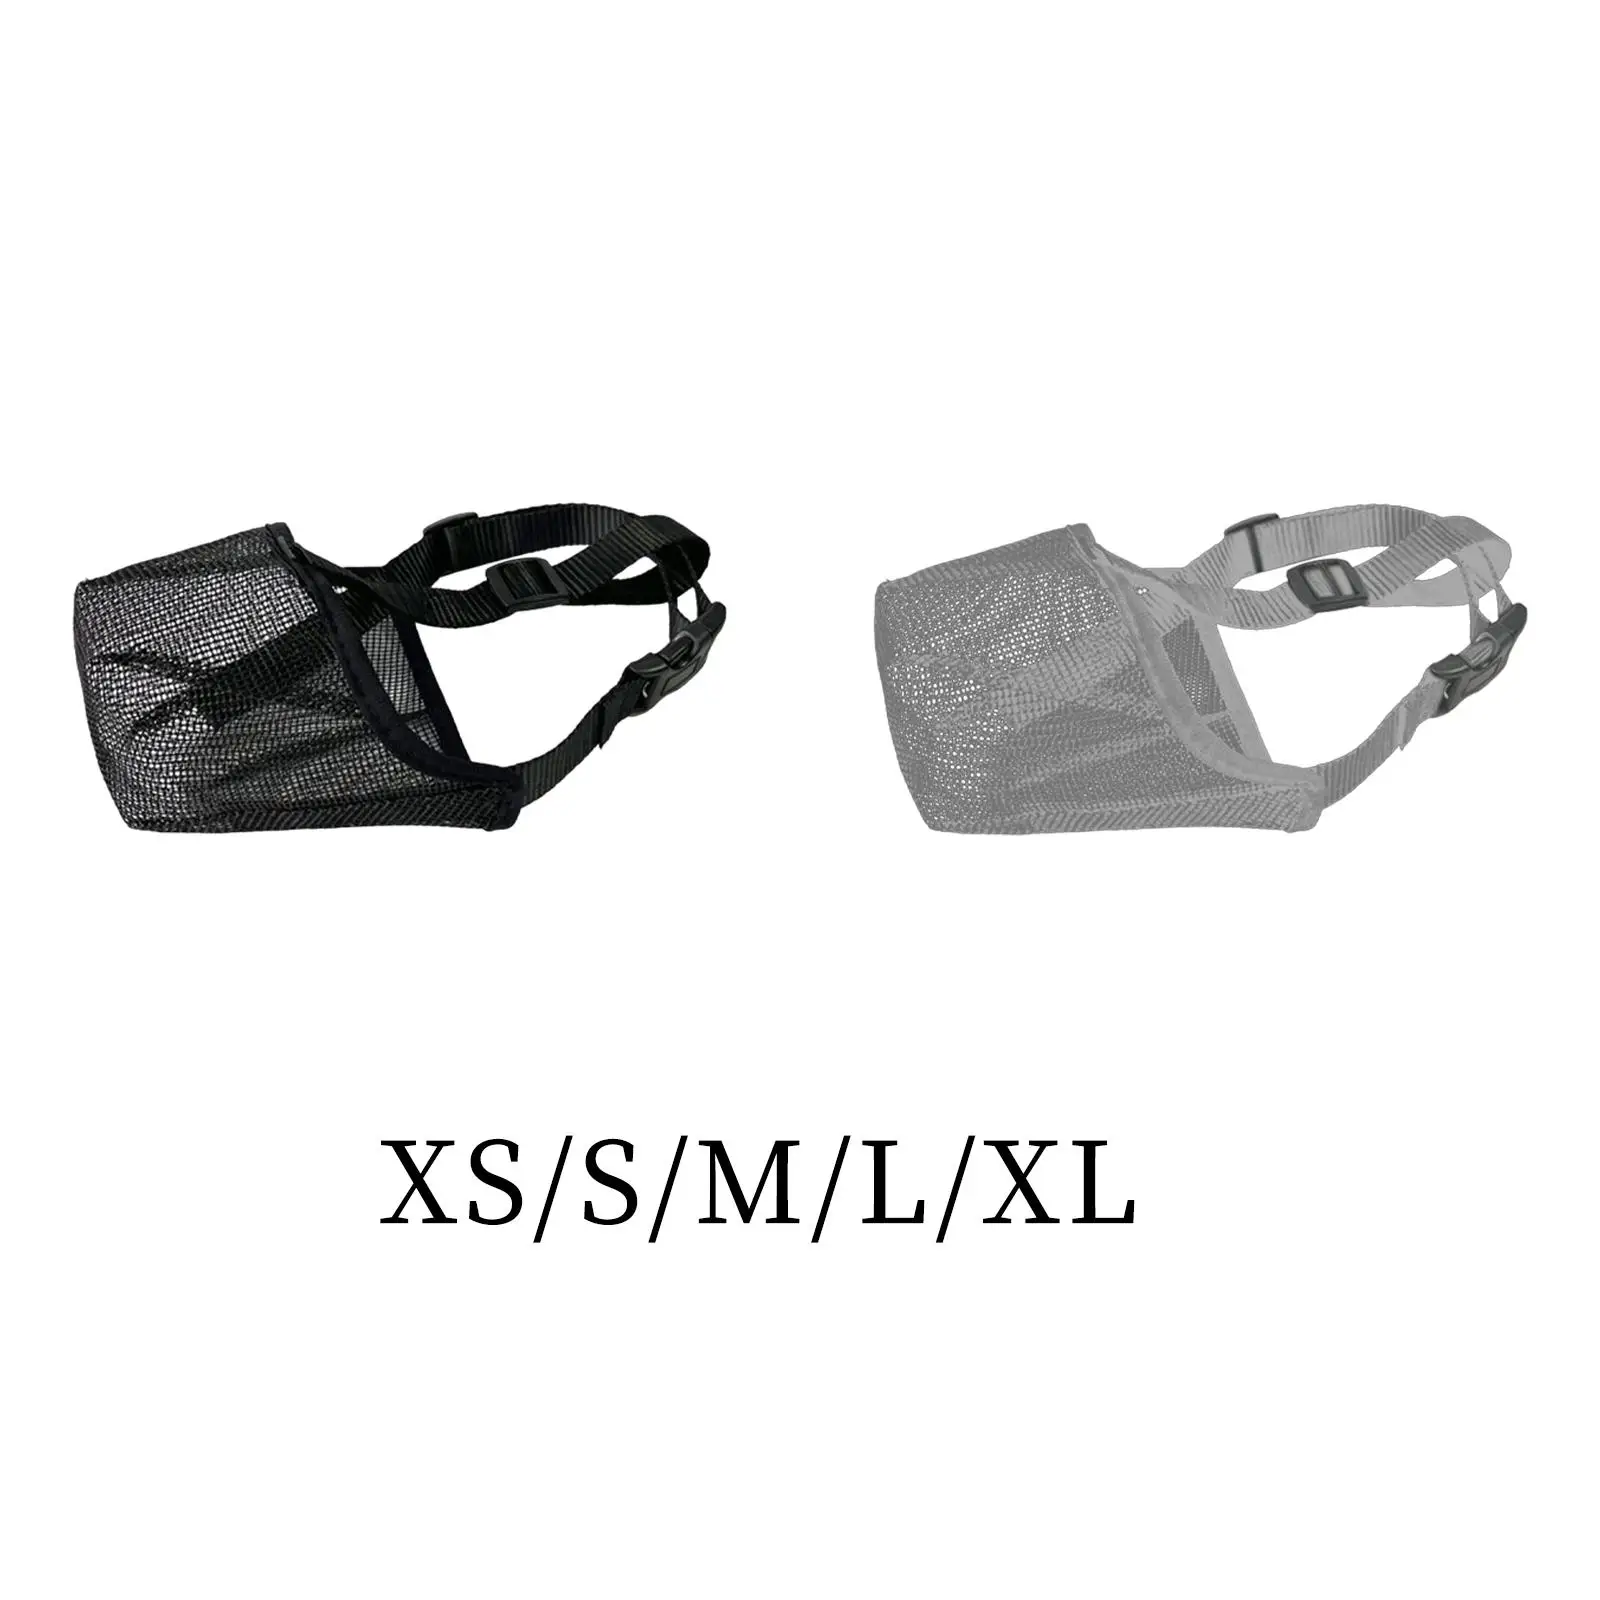 Muzzle for Dog with Adjustable Straps Mesh Mask Cover for Behavior Training